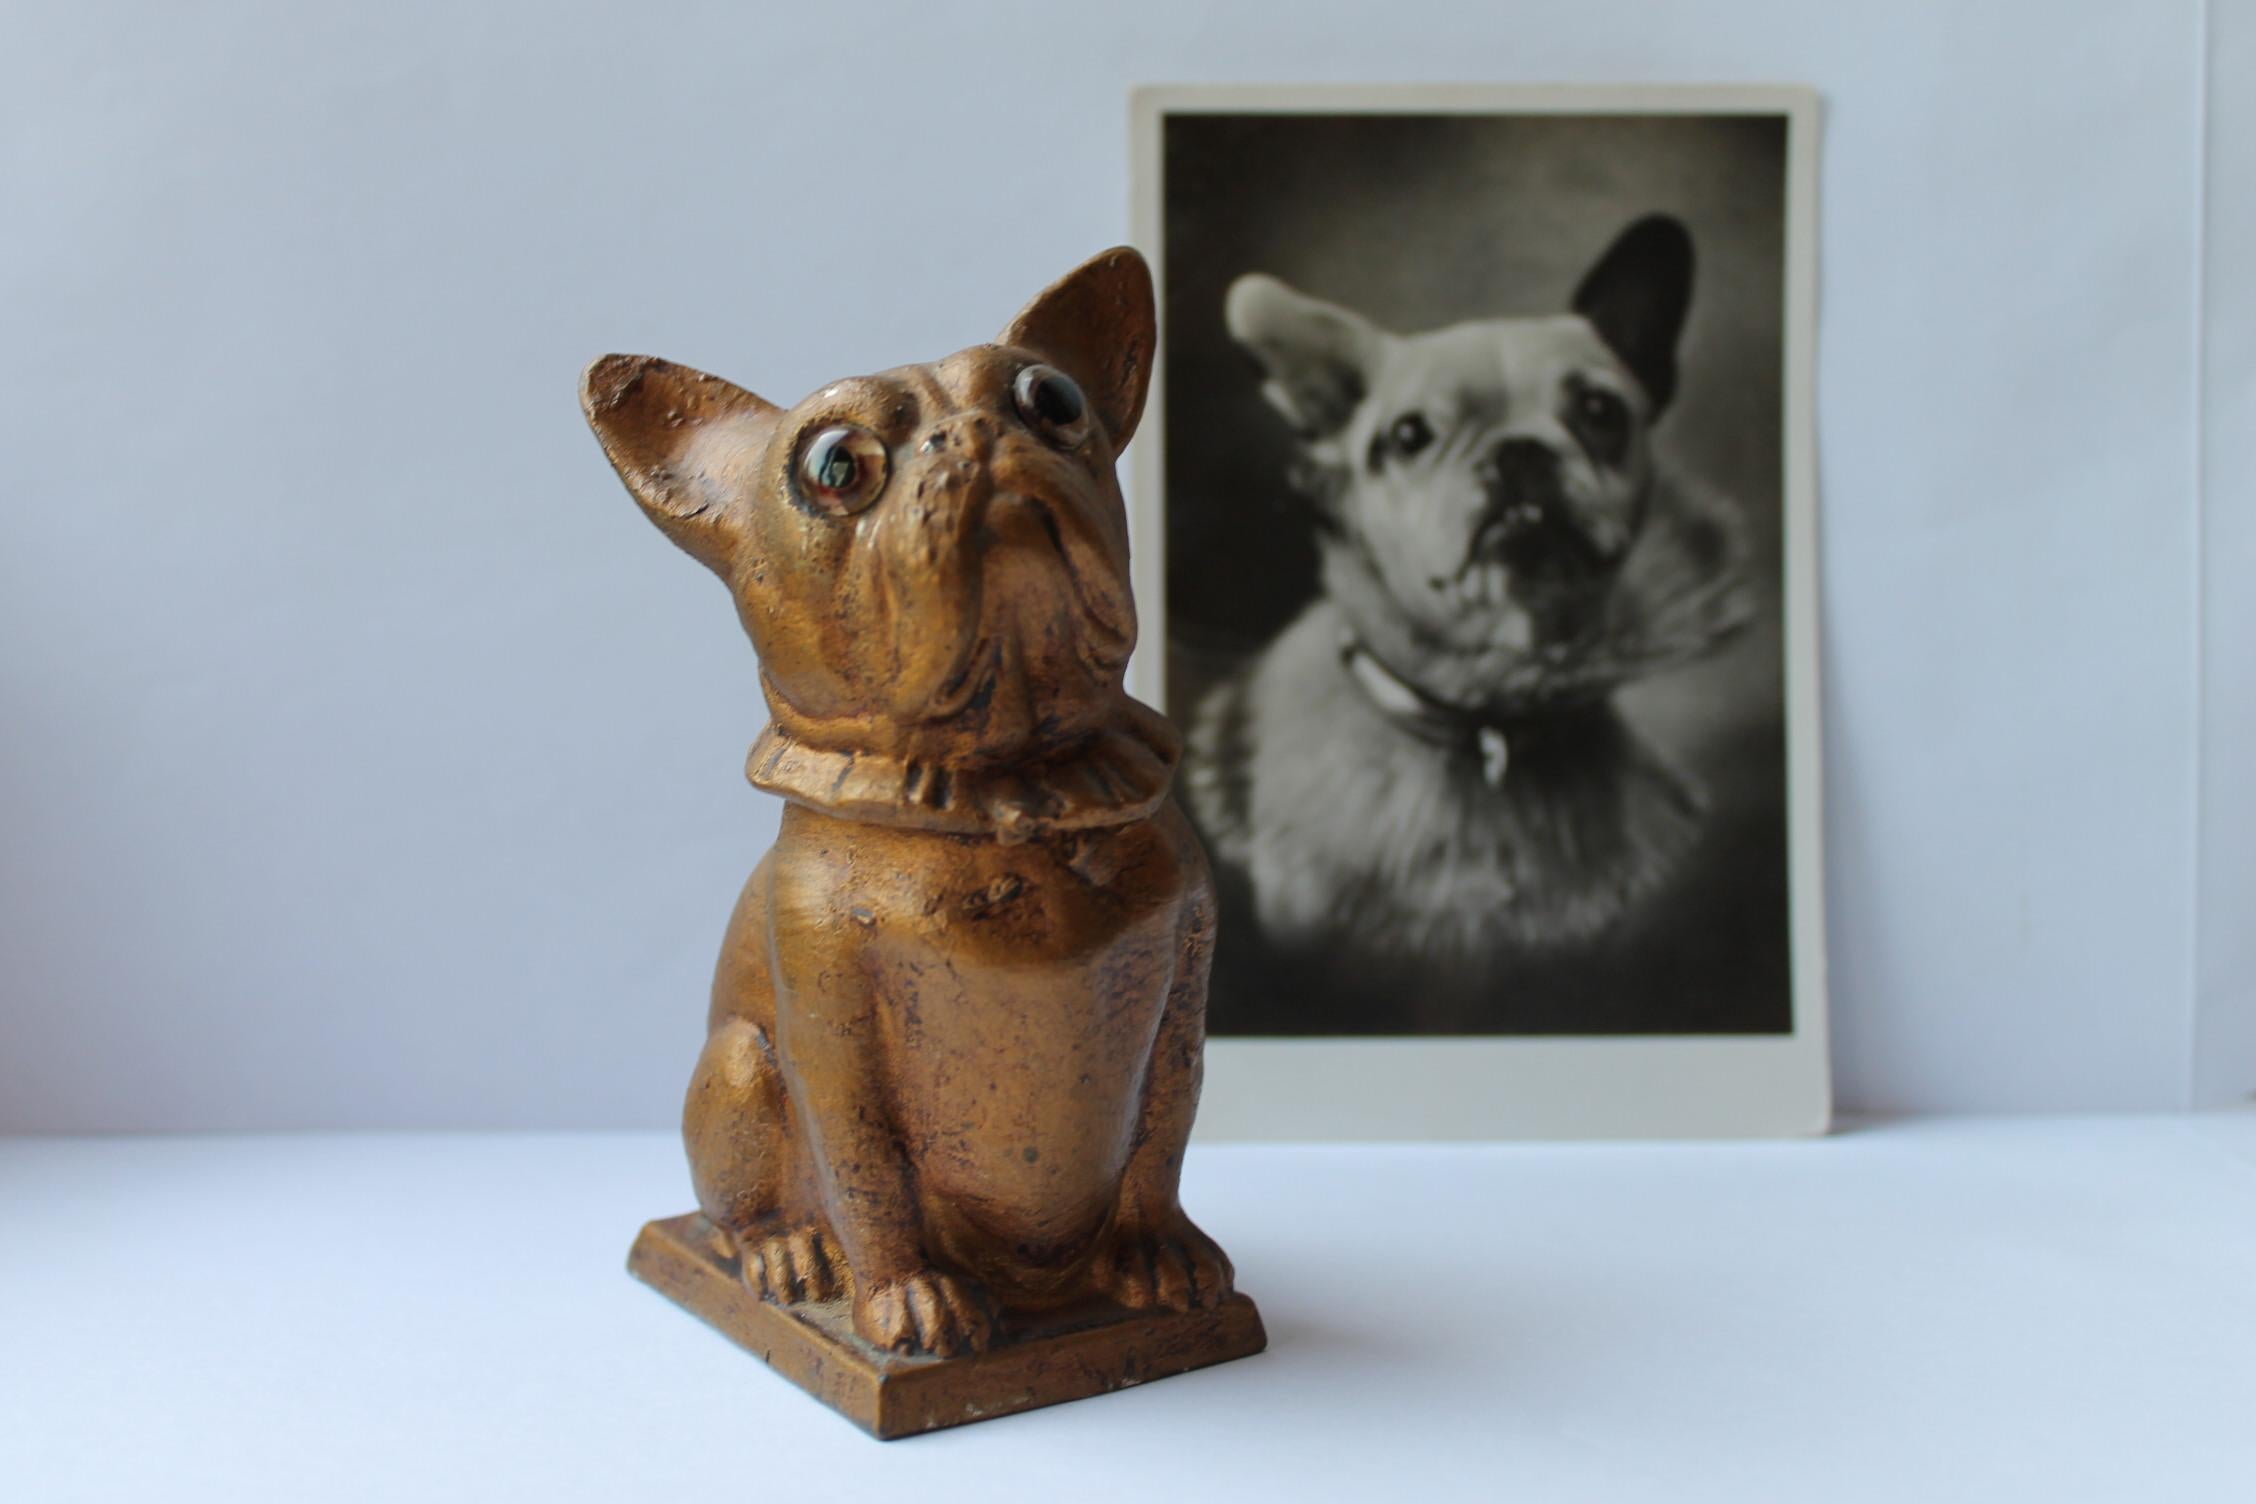 Cute Gold Painted Metal Bulldog Money Bank .
This Moneybox Bulldog Dog Figurine has  Big Eyes which are looking into yours, so you can't say no to him.
It's a Detailed Bulldog Figurine with Collar.
To empty your money box in the shape of a dog, you